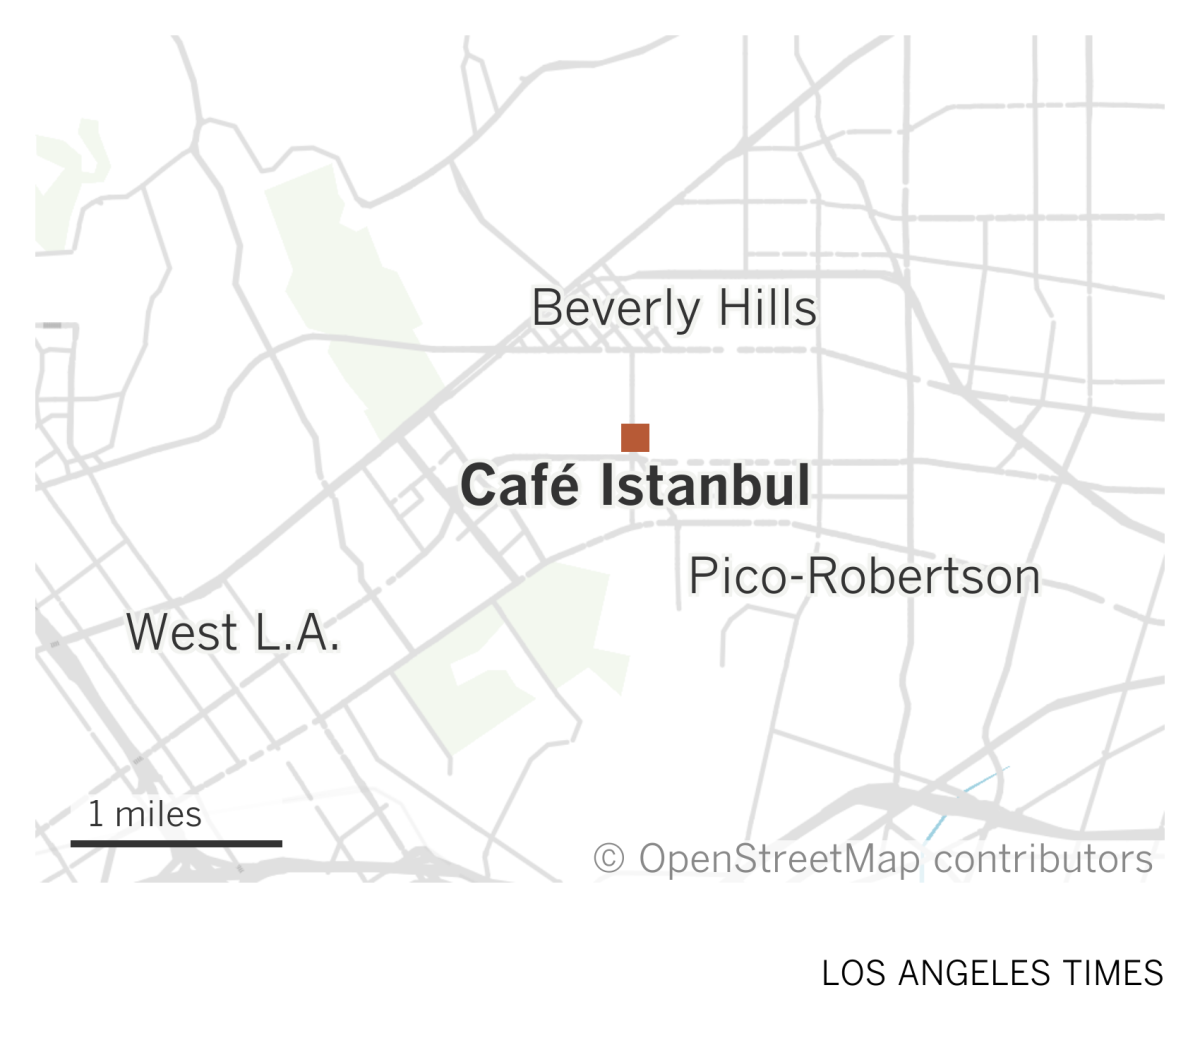 A map shows the location of Cafe Istanbul in Beverly Hills